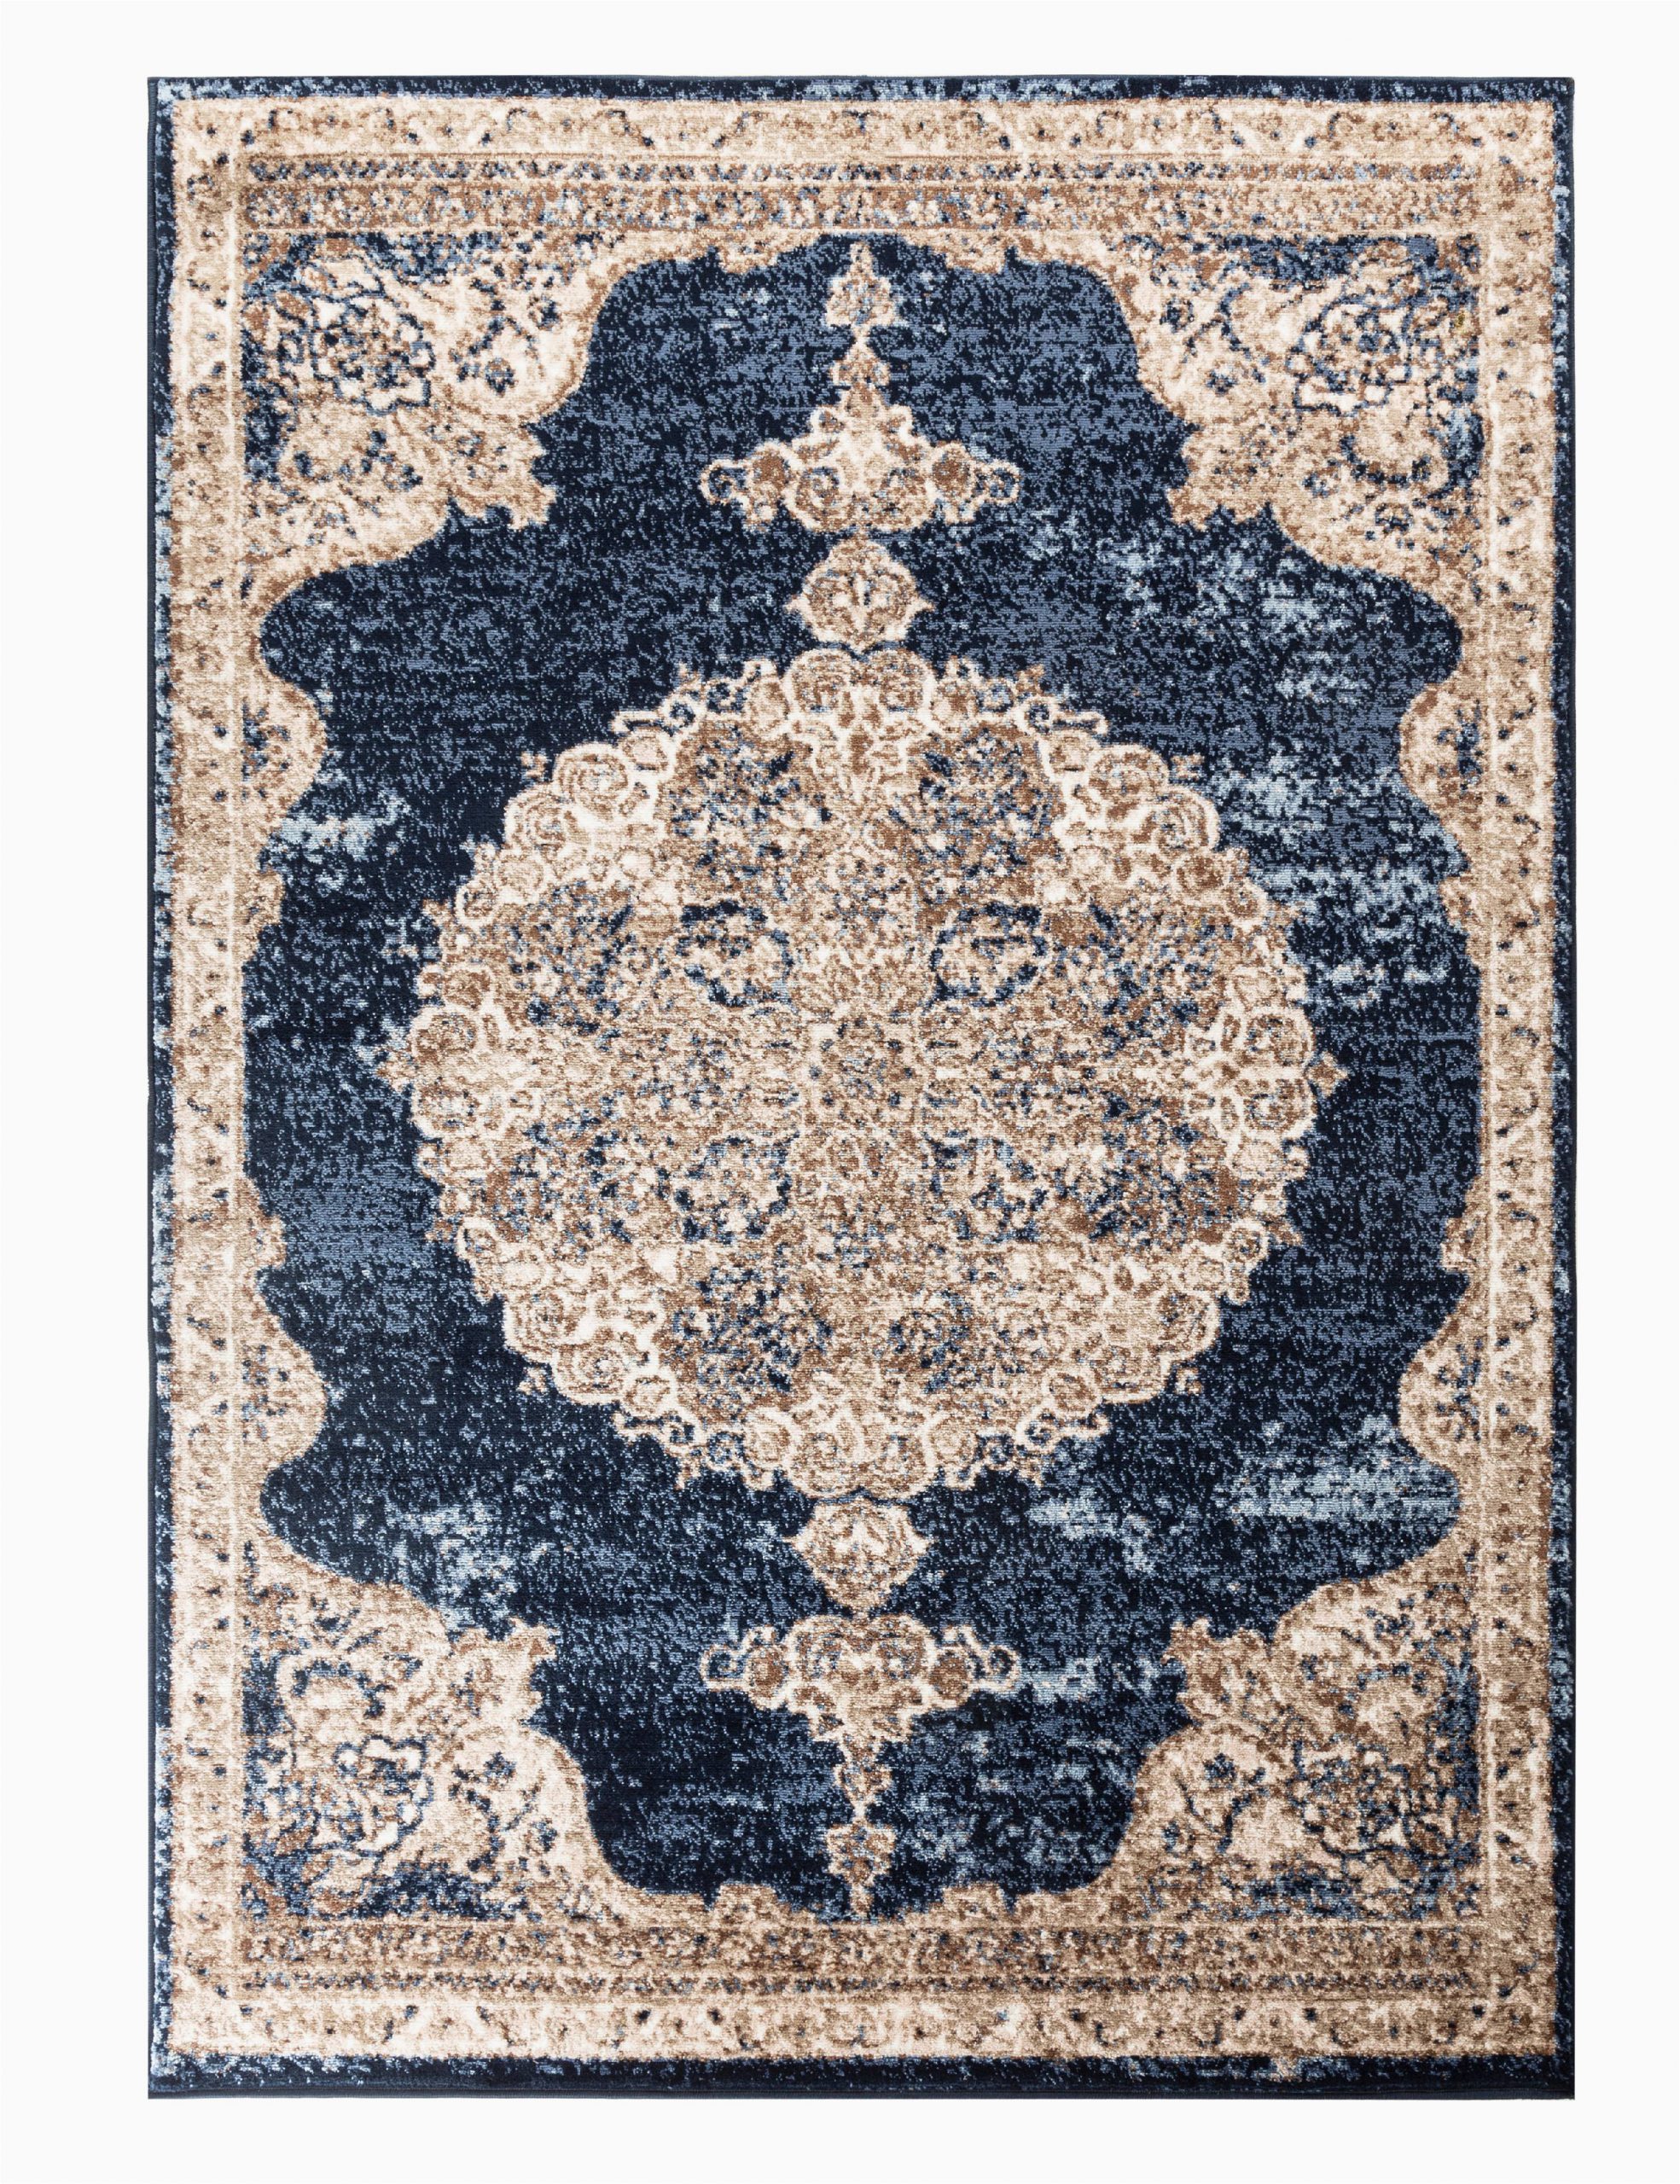 Navy Blue and Brown area Rug Romance Collection Rugs Navy Blue Brown Multi Colored Traditional oriental Design Premium soft area Rug 5 1" X 7 2" Rug Size